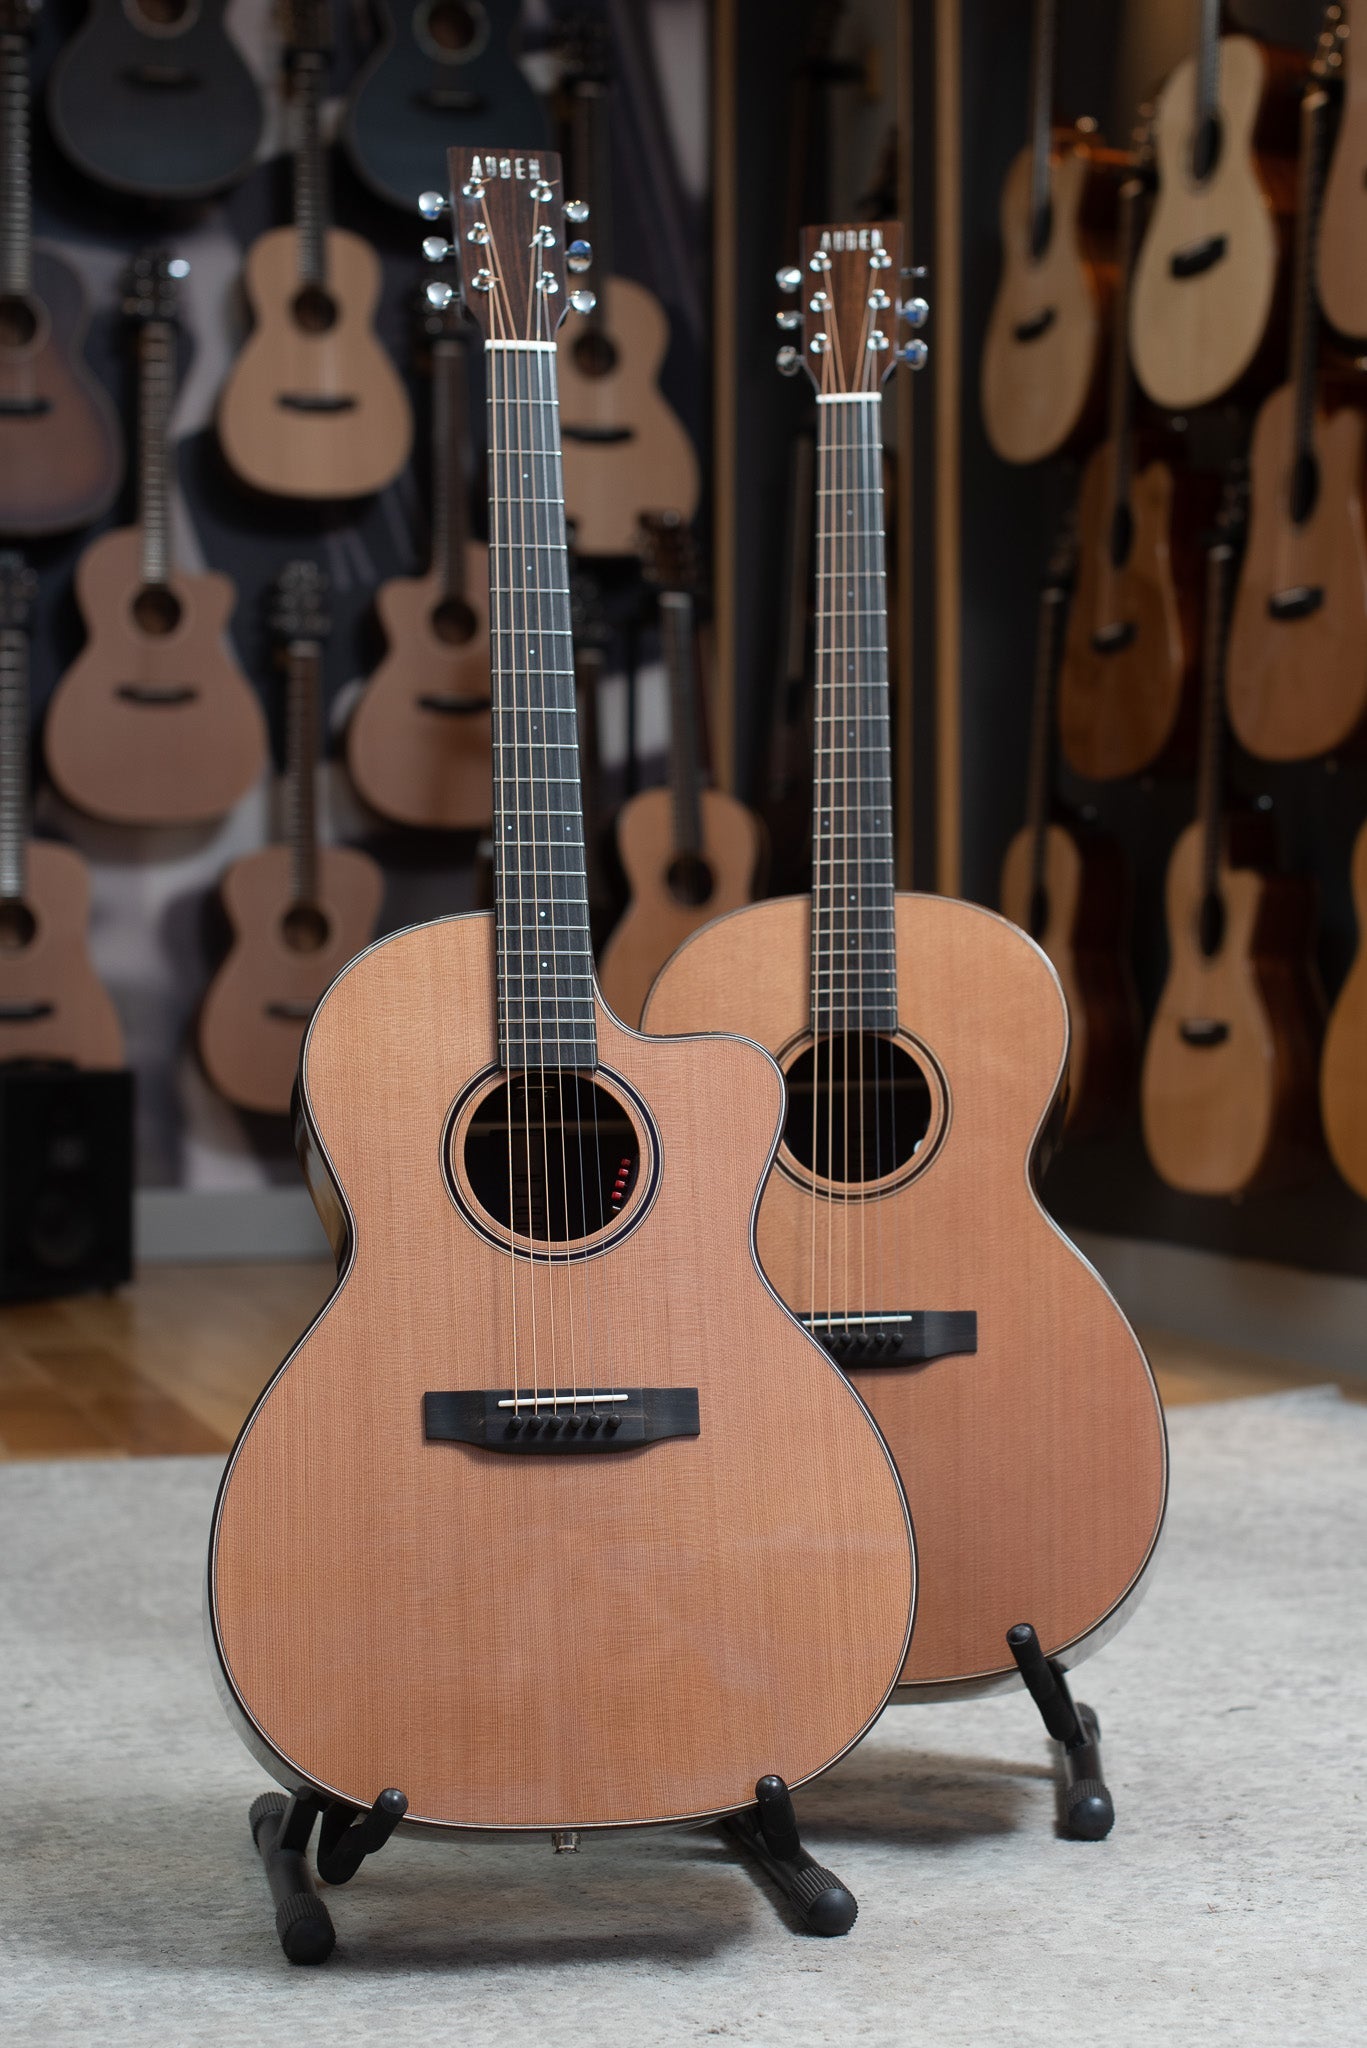 Auden Chester Rosewood Series Fully Body Cedar Top Electro Acoustic Guitar, Electro Acoustic Guitar for sale at Richards Guitars.